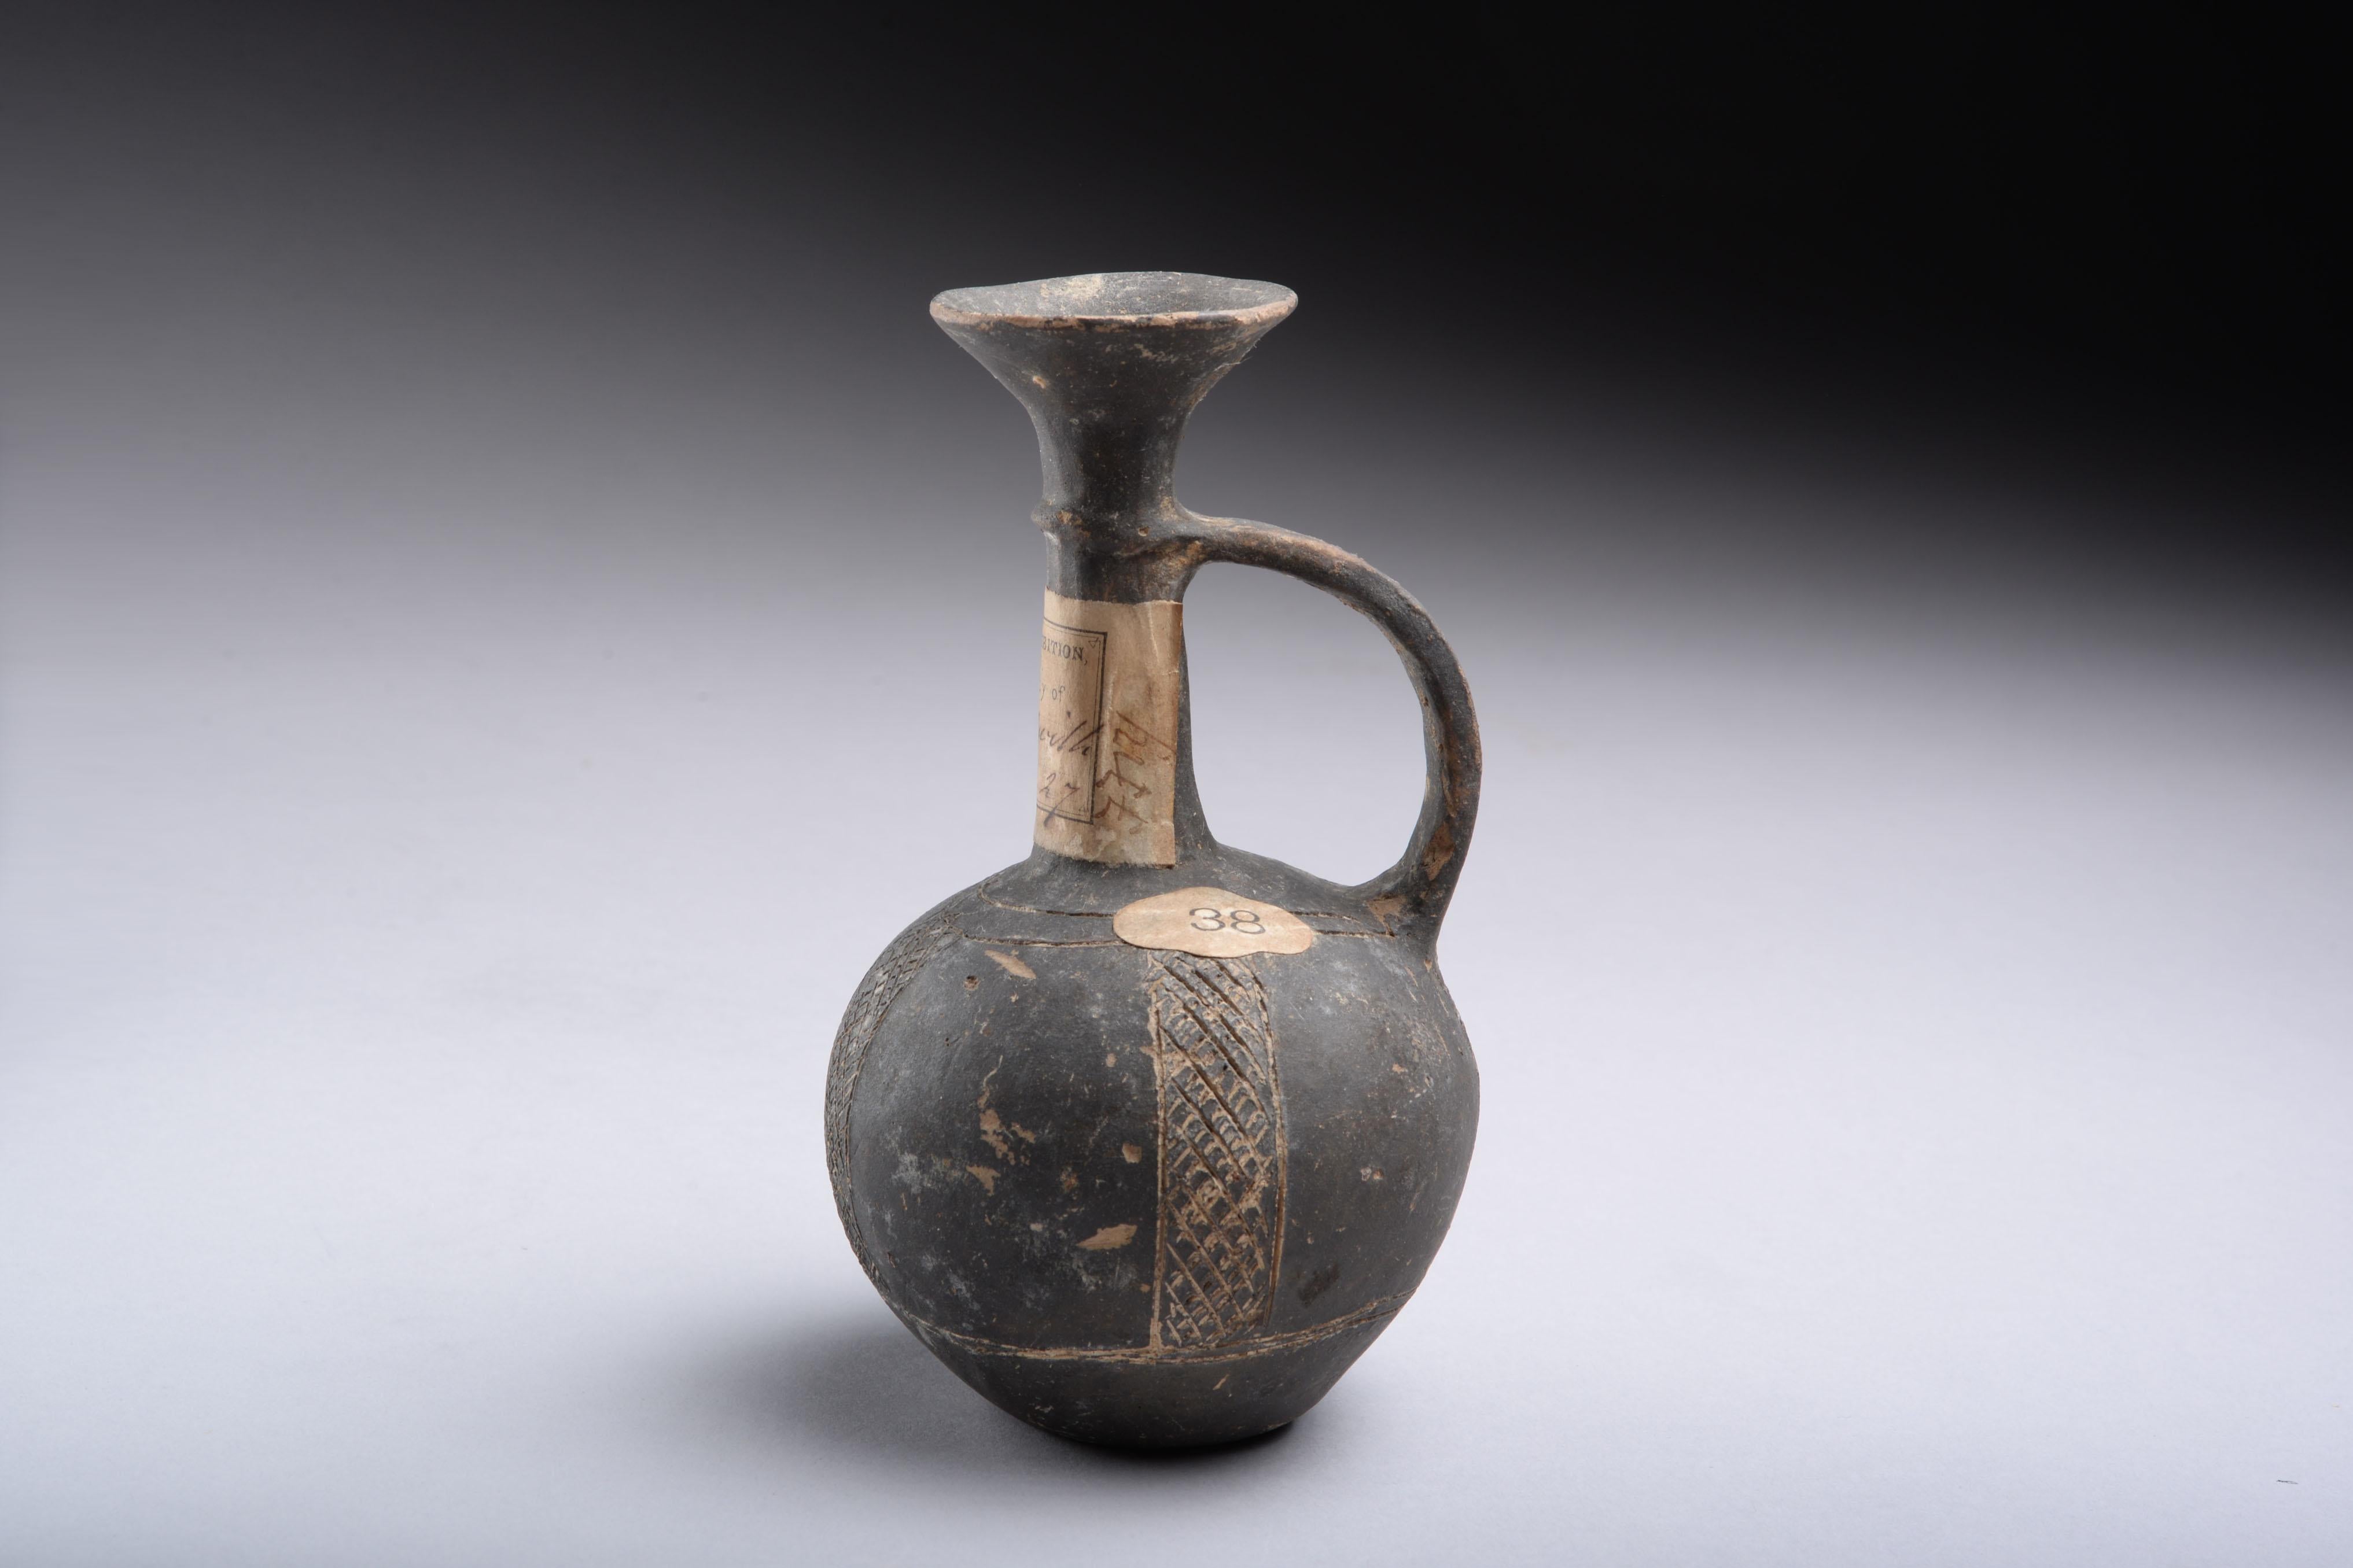 Terracotta Exceptional Ancient Cypriot Bronze Age Jug